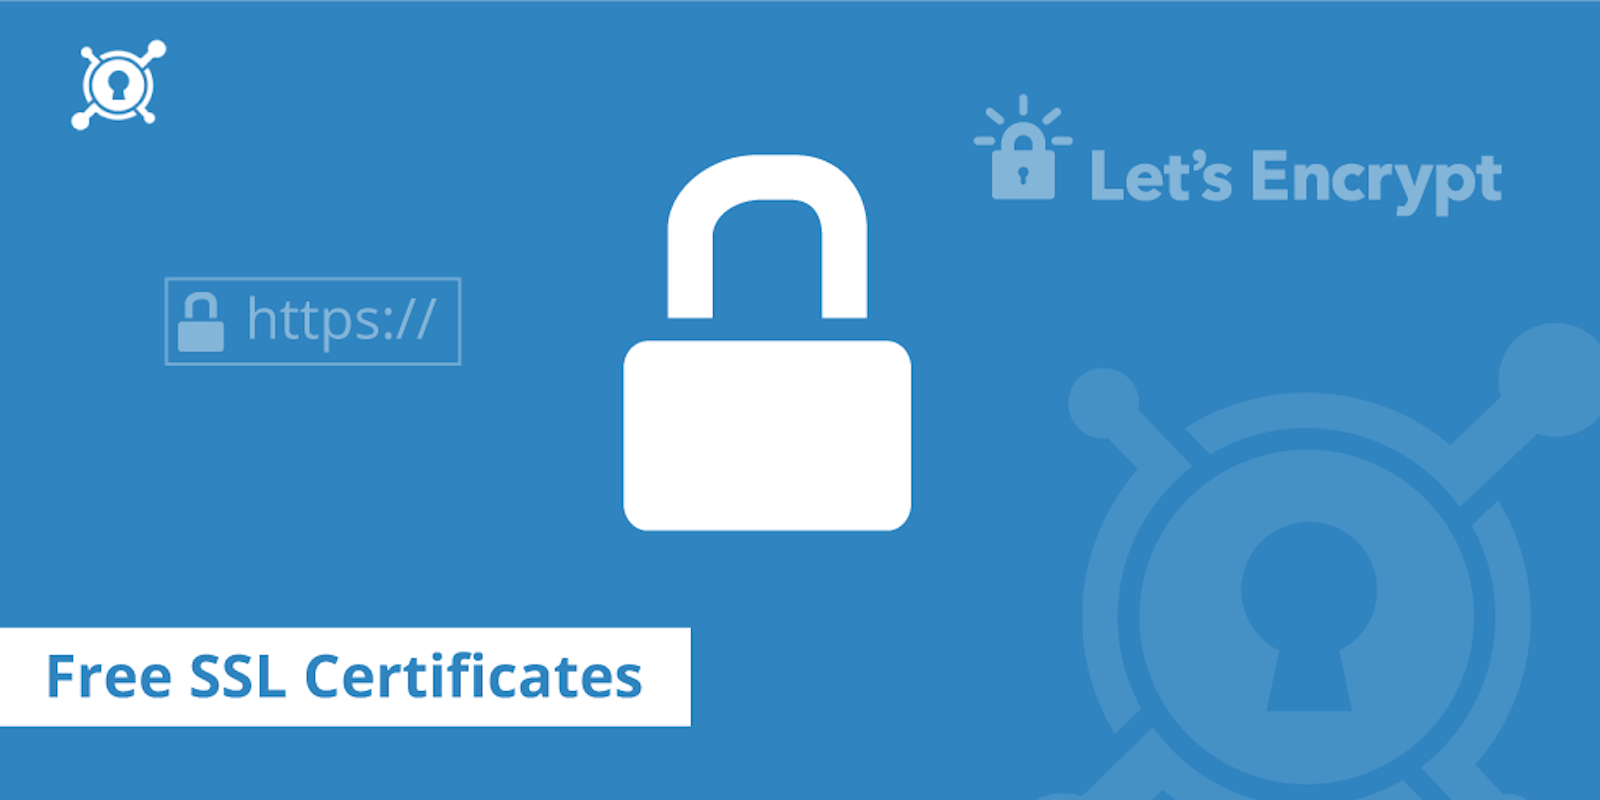 Creating self-signed certificate using makecert.exe